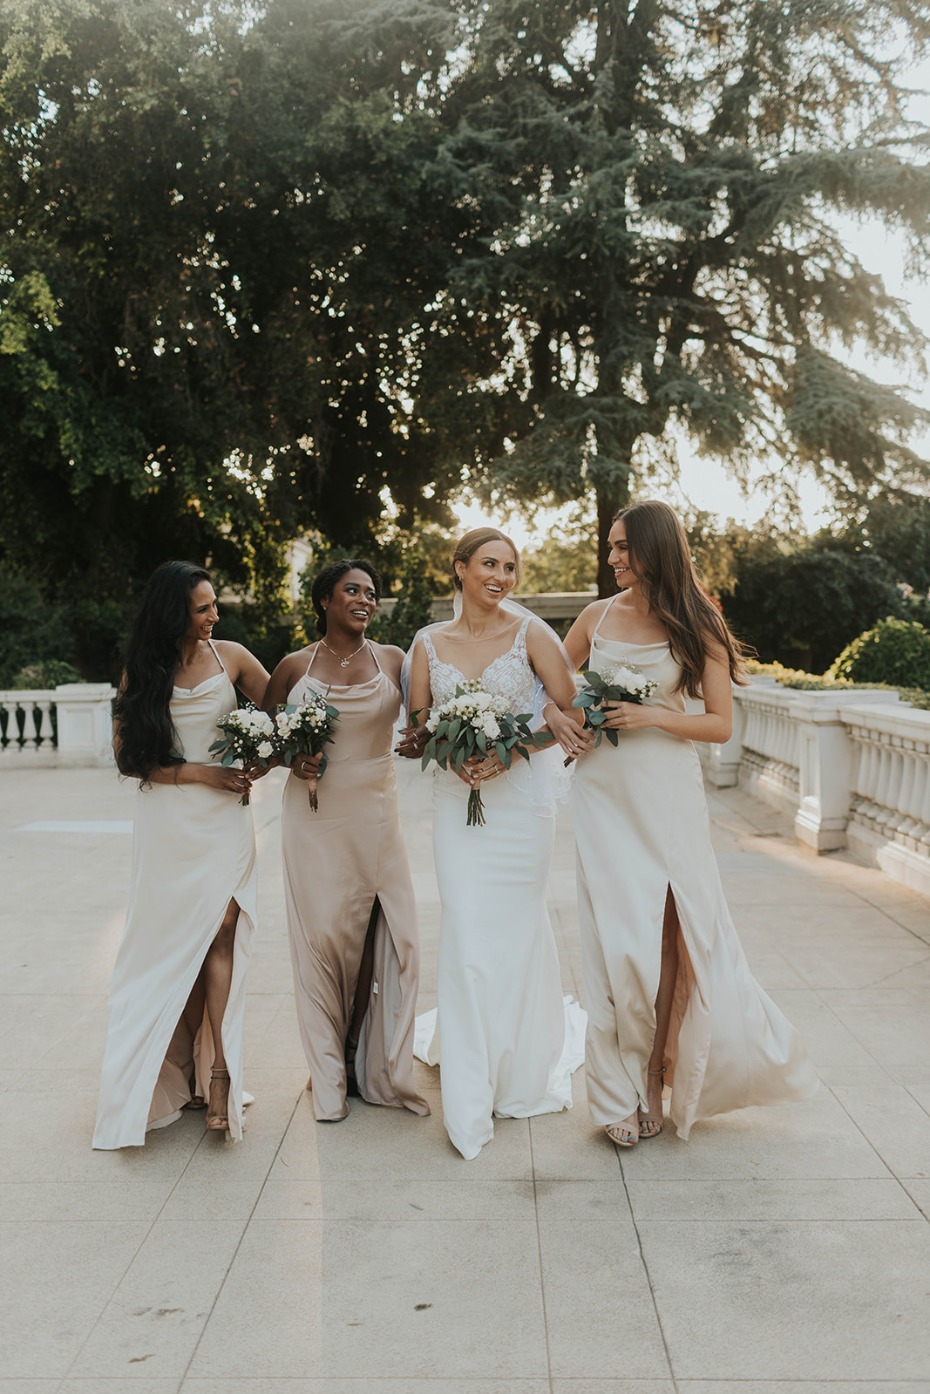 Matched or Mixed, You Can Do One, Both, or More With This Bridesmaid Brand